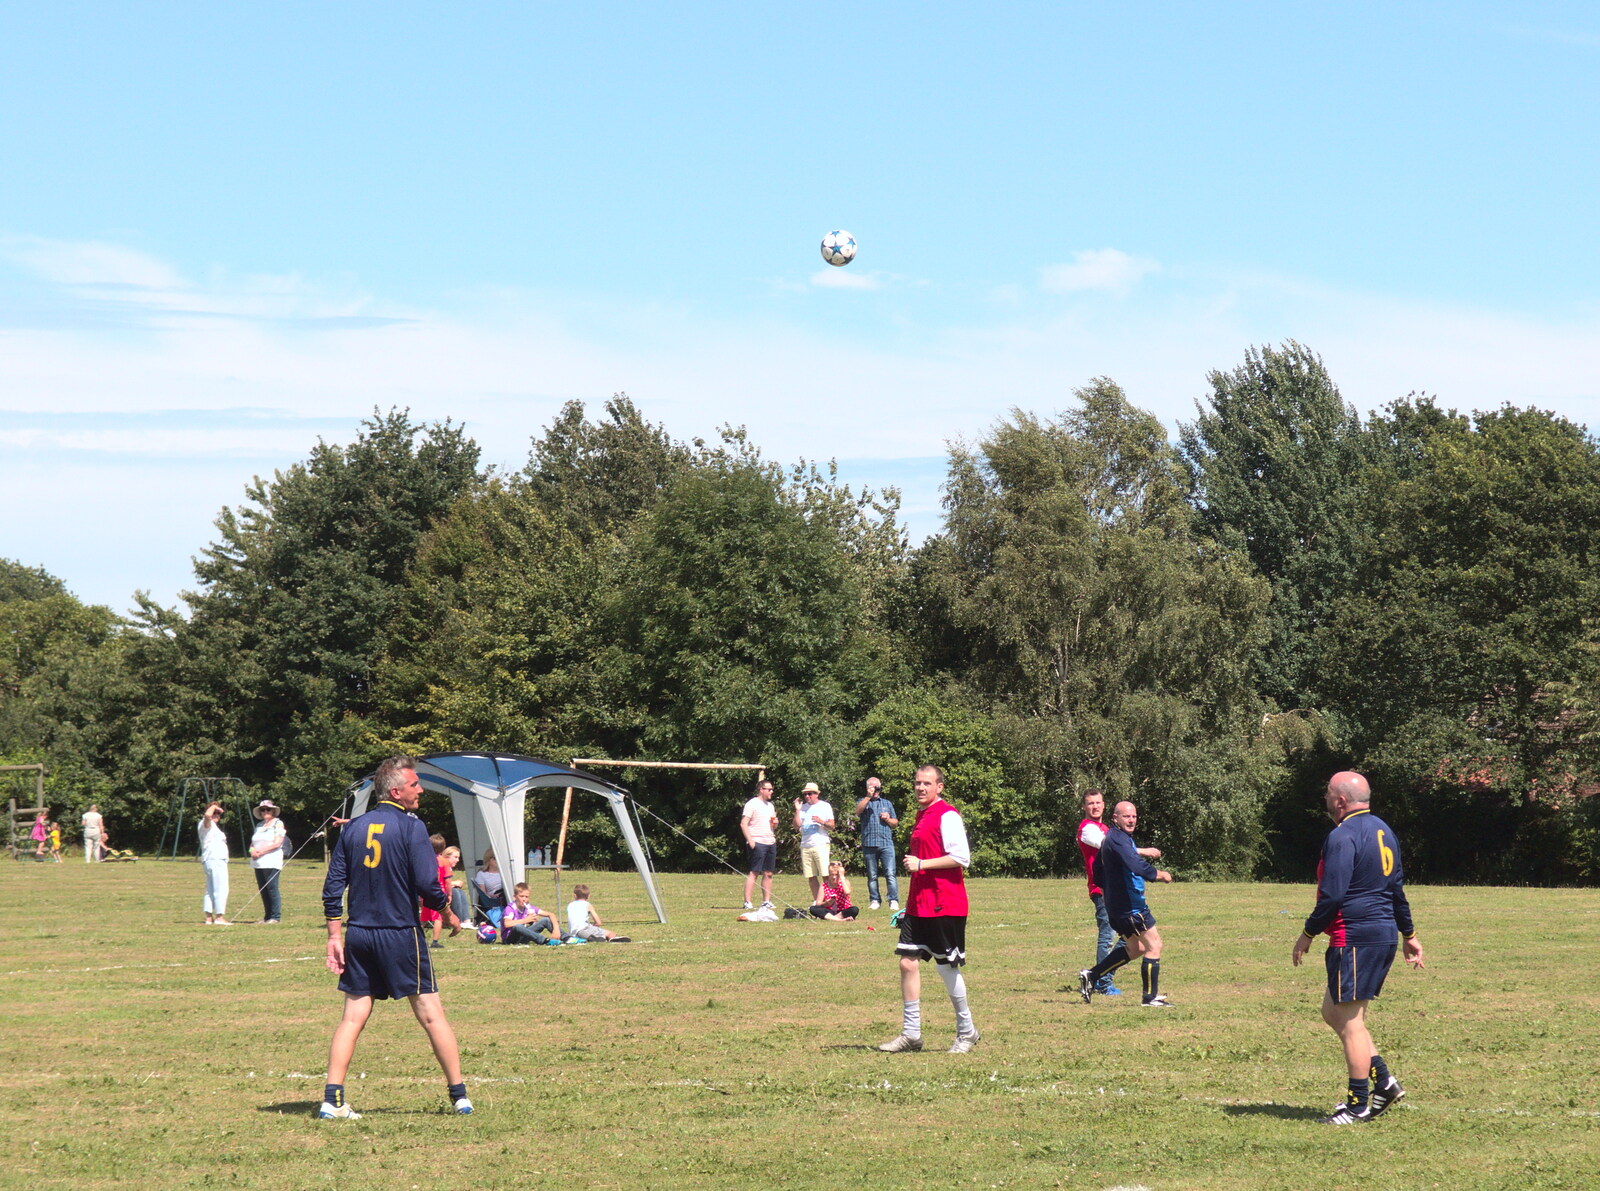 Football action from The Humpty Dumpty Beer Festival, Reedham, Norfolk - 22nd July 2017